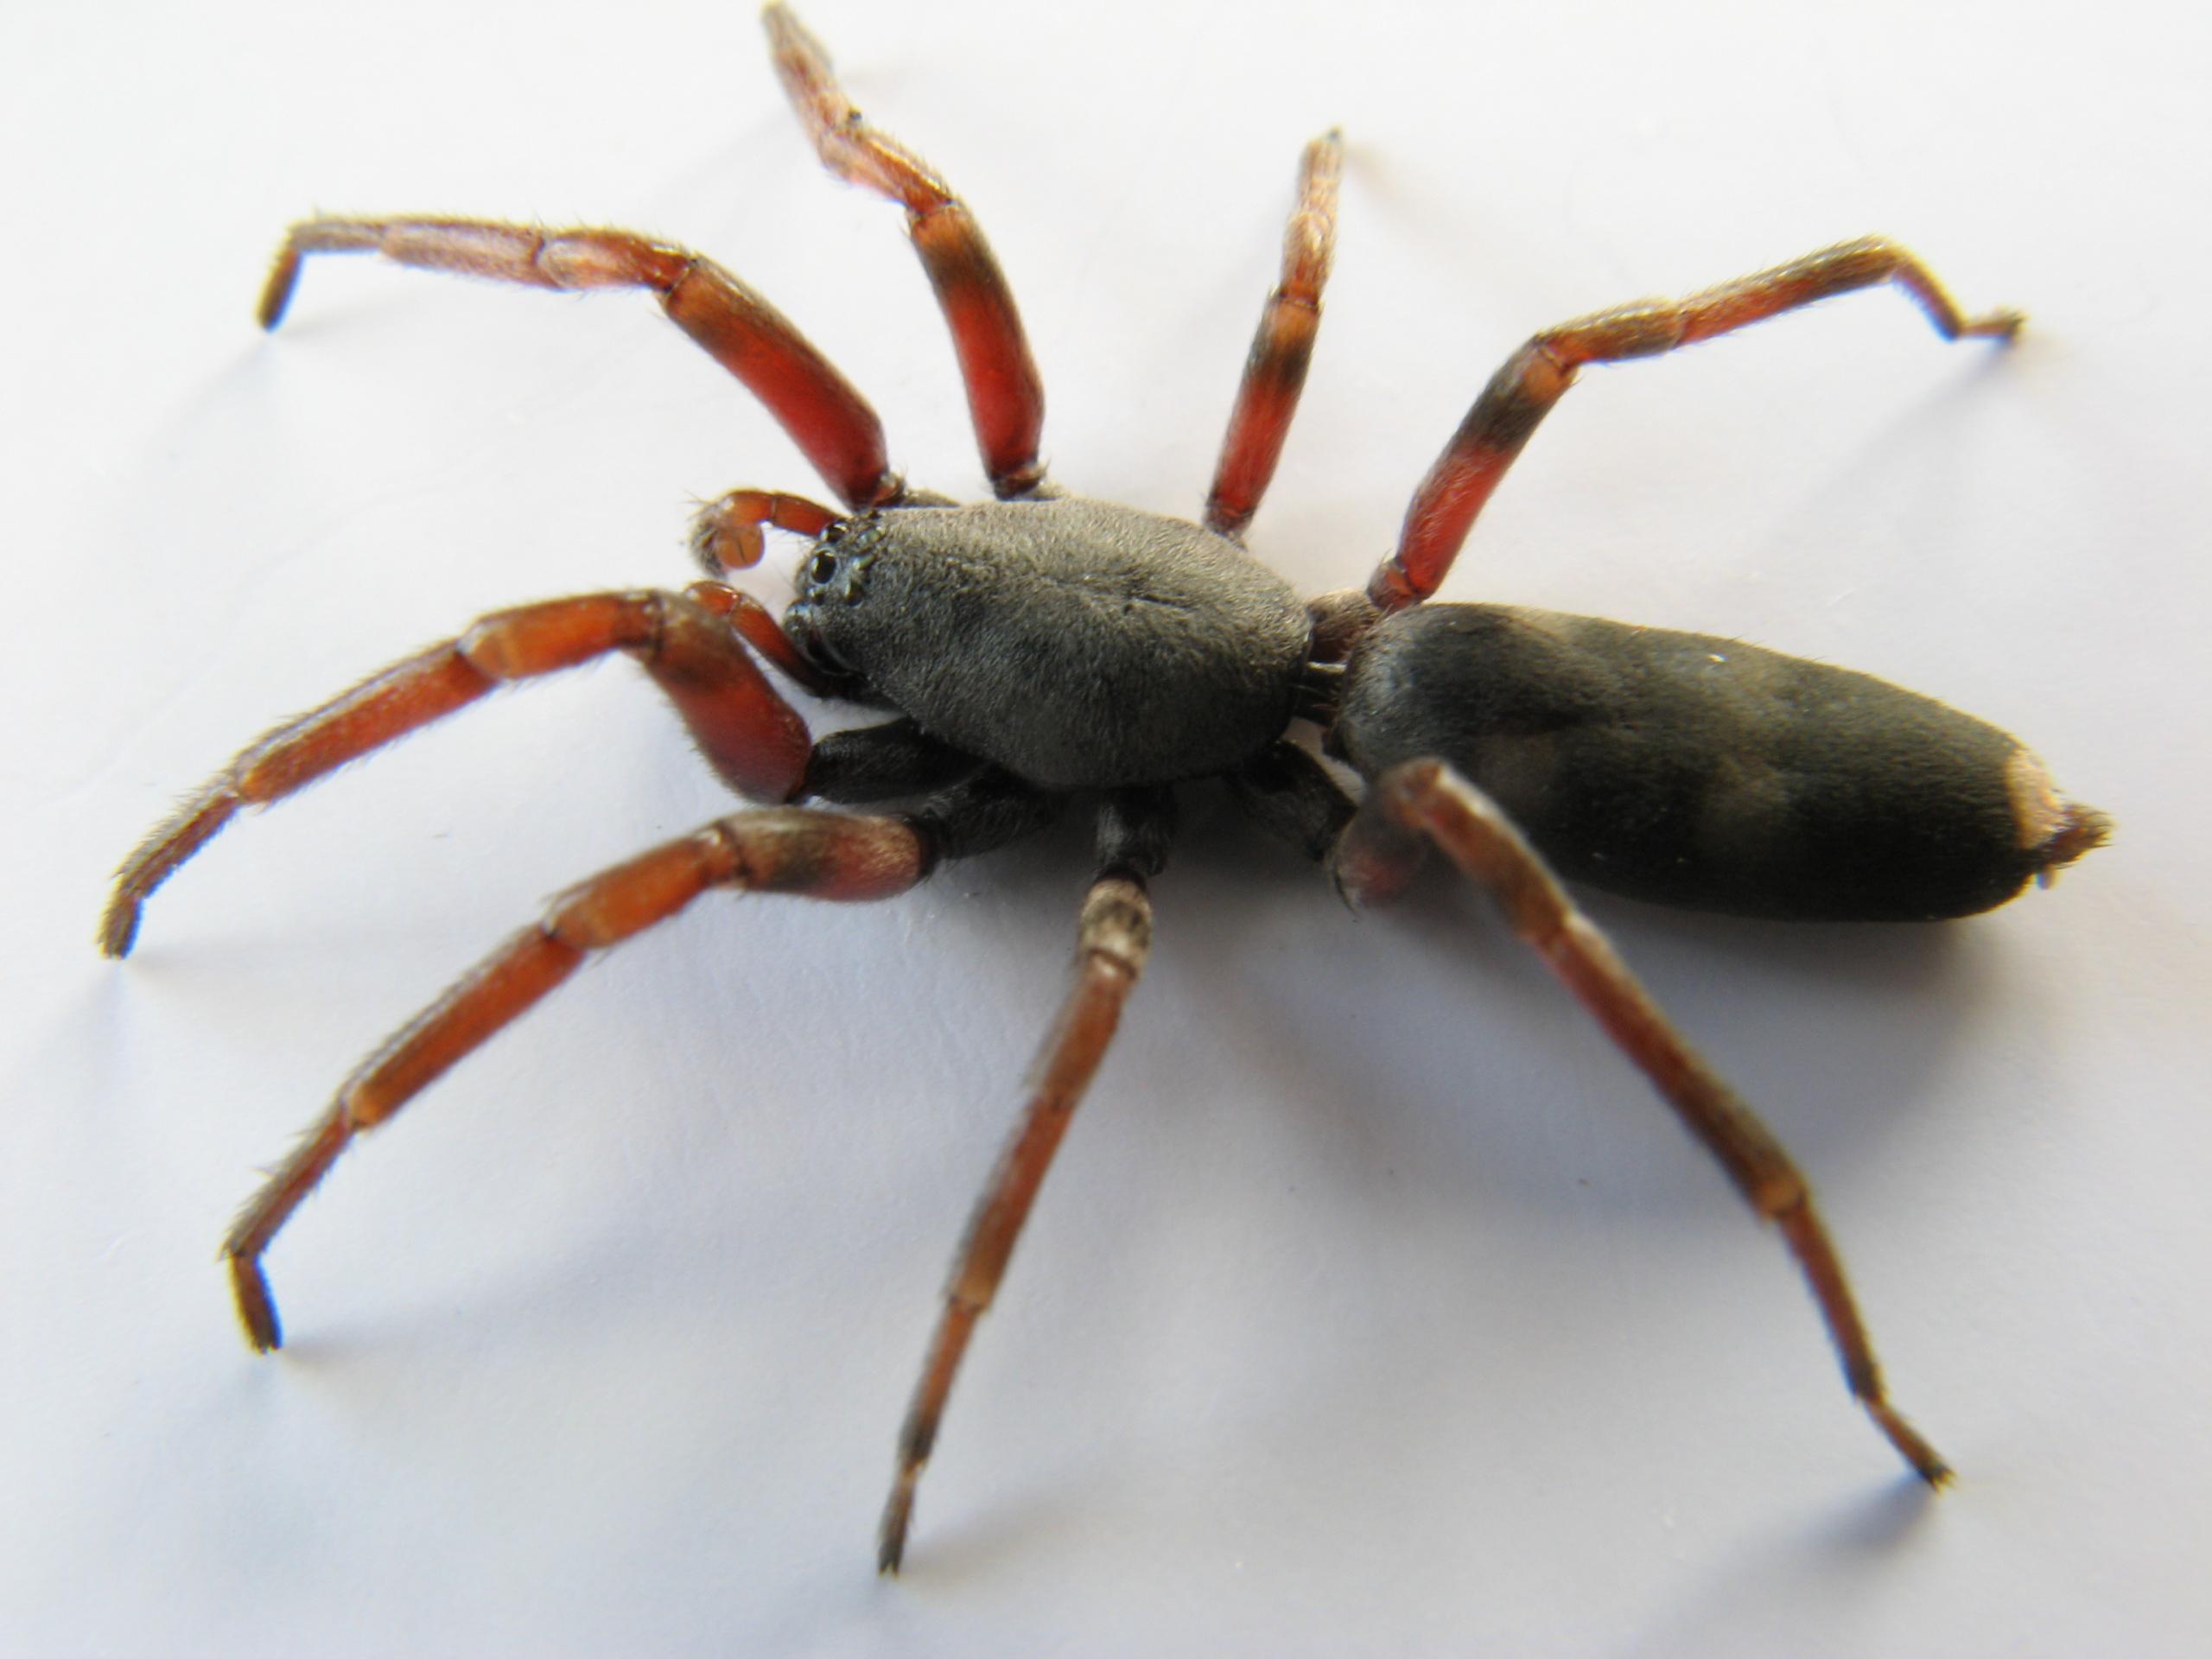 Get The Best Pest Management In Palmerston North For White-Tail Spider Removal